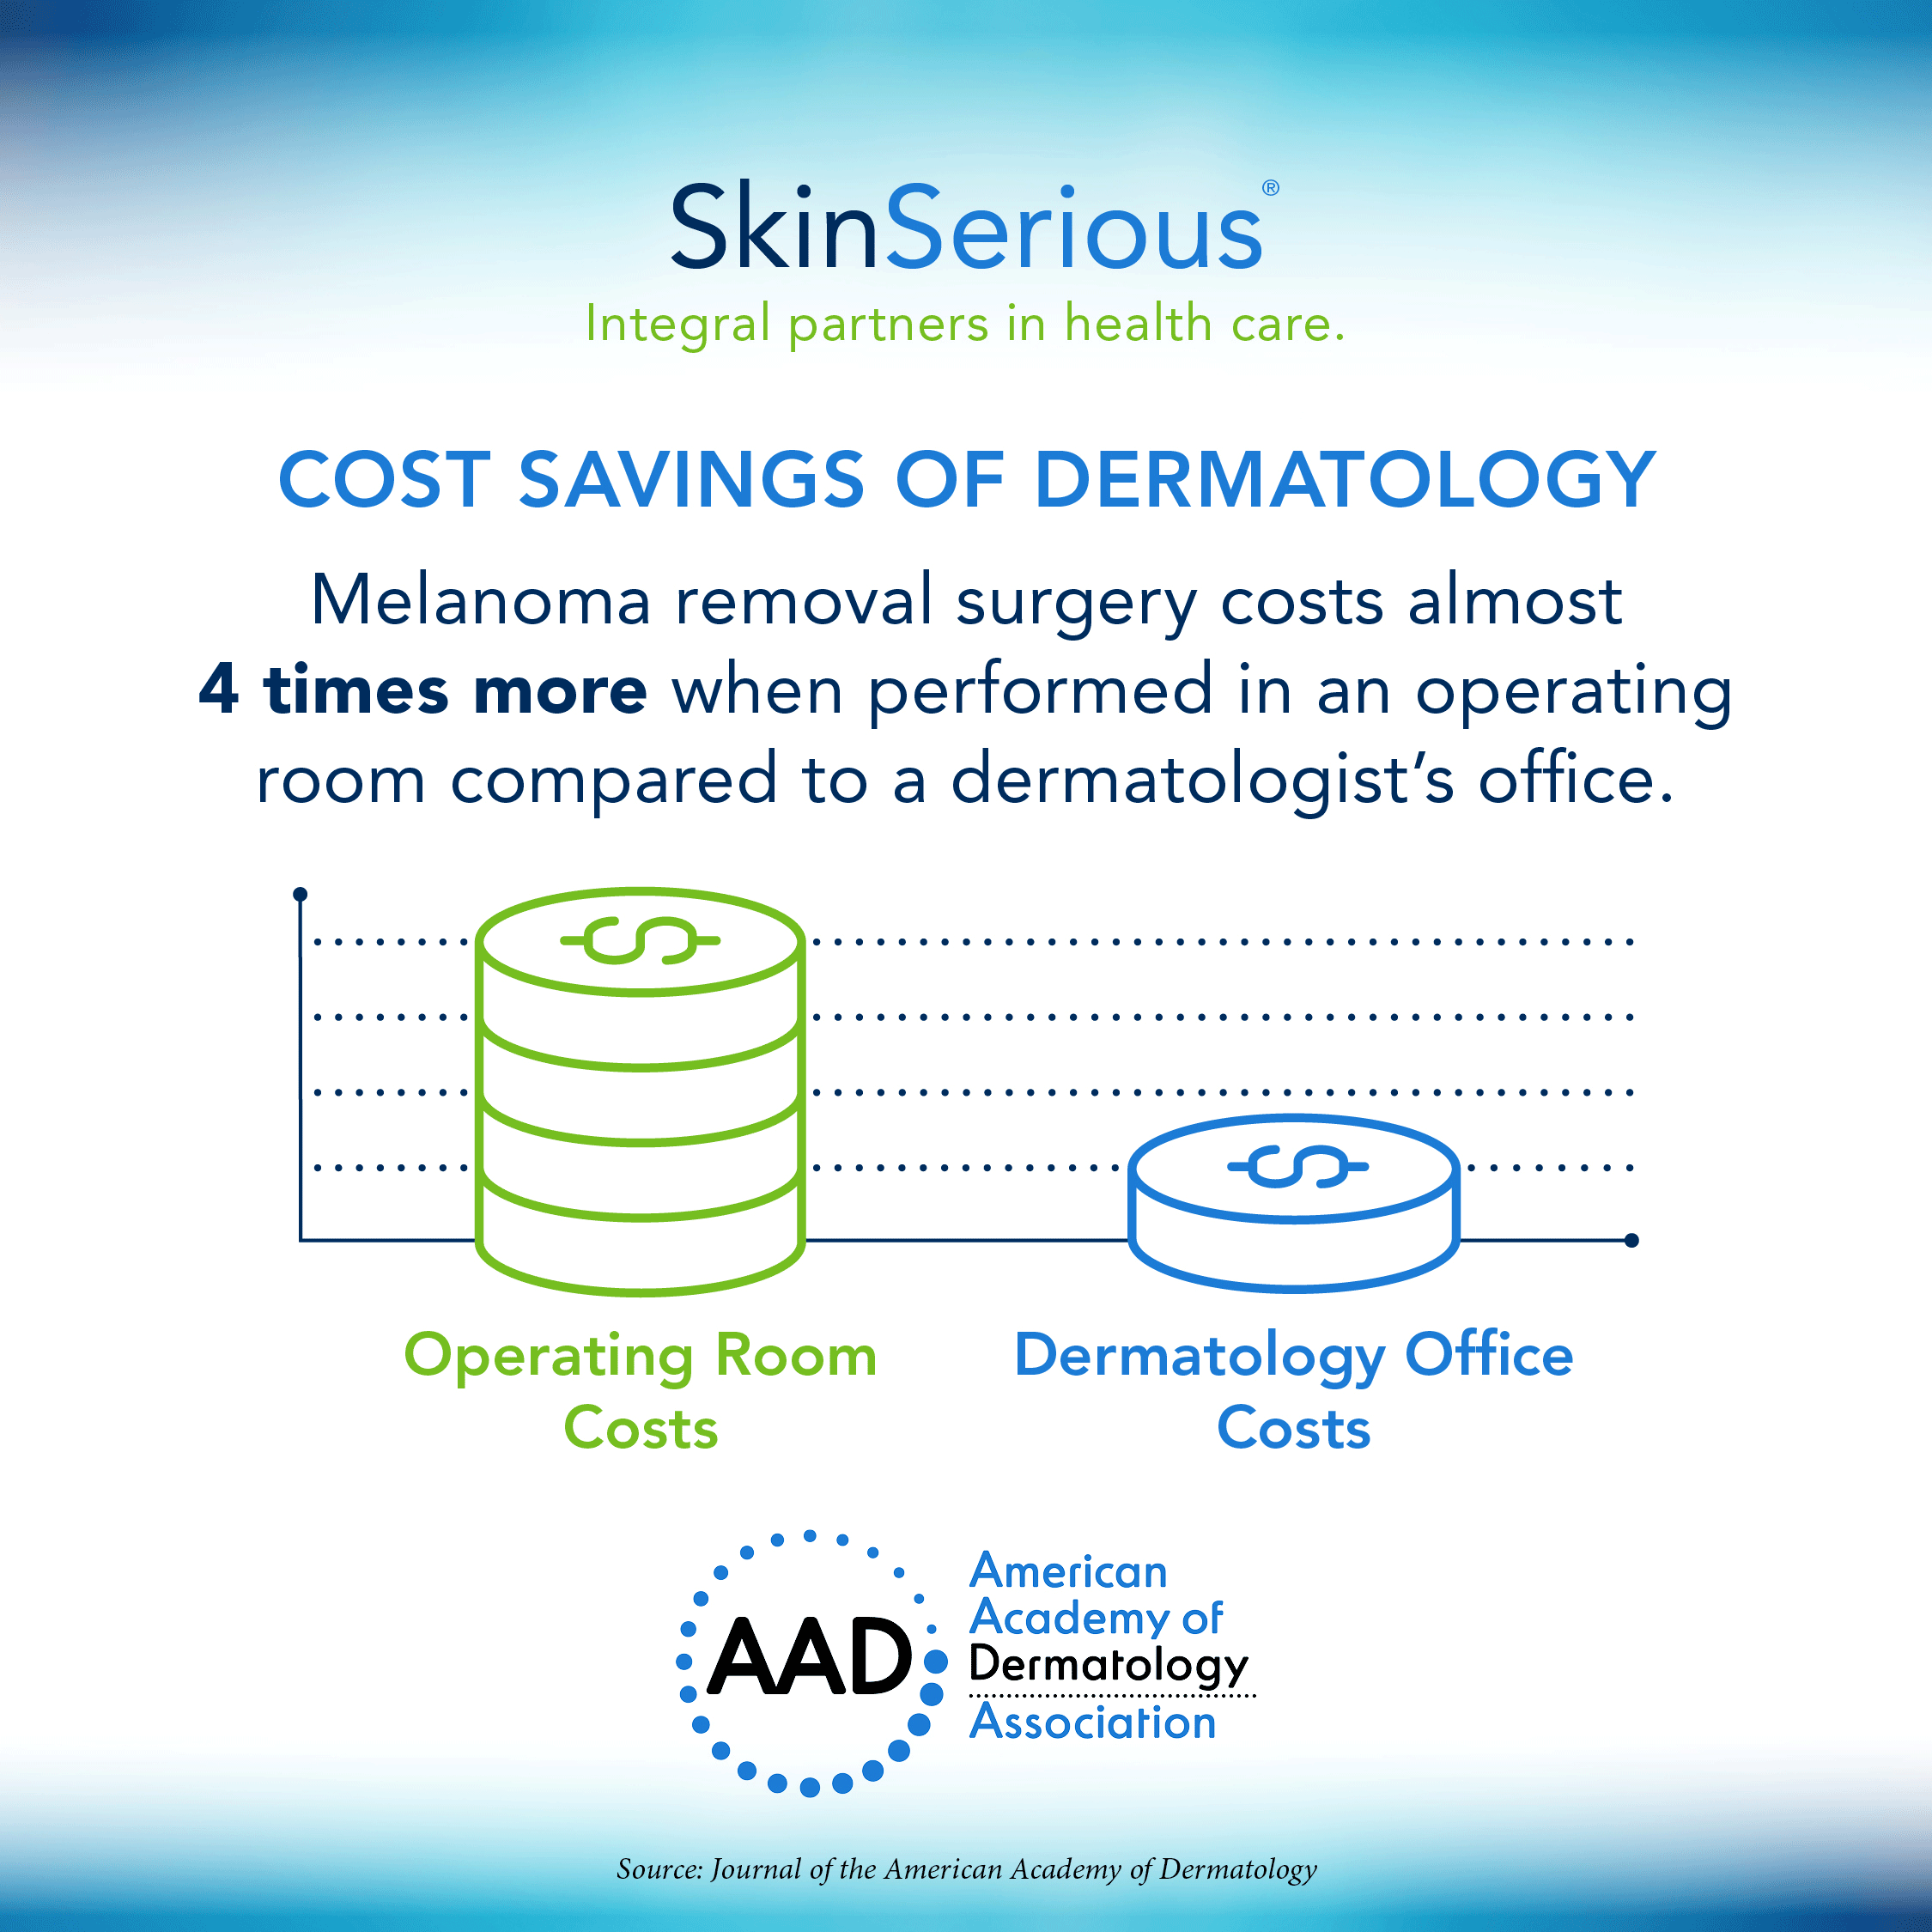 Infographic explaining how dermatologists perform lifesaving, cost-effective in-office surgeries, saving patients and the health care system time and money.